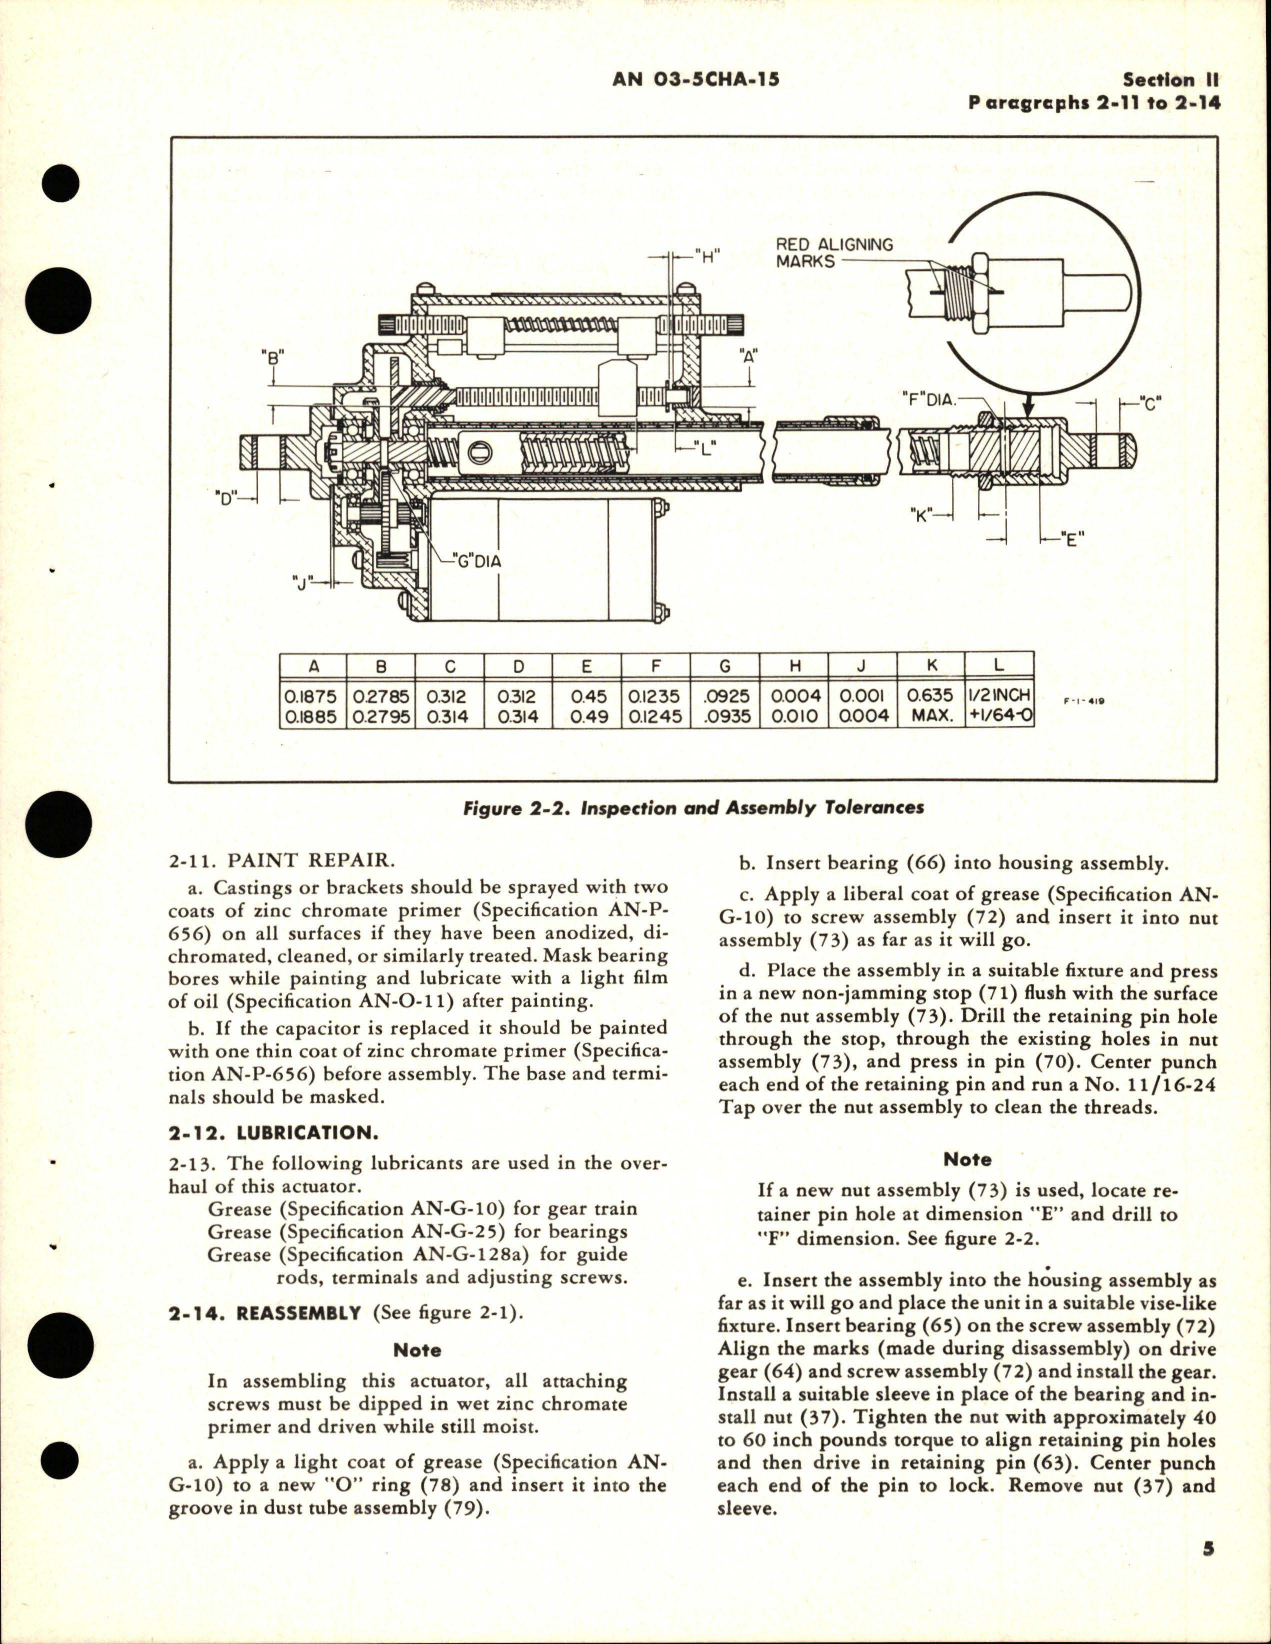 Sample page 9 from AirCorps Library document: Overhaul Instructions for Electromechanical Linear Actuators